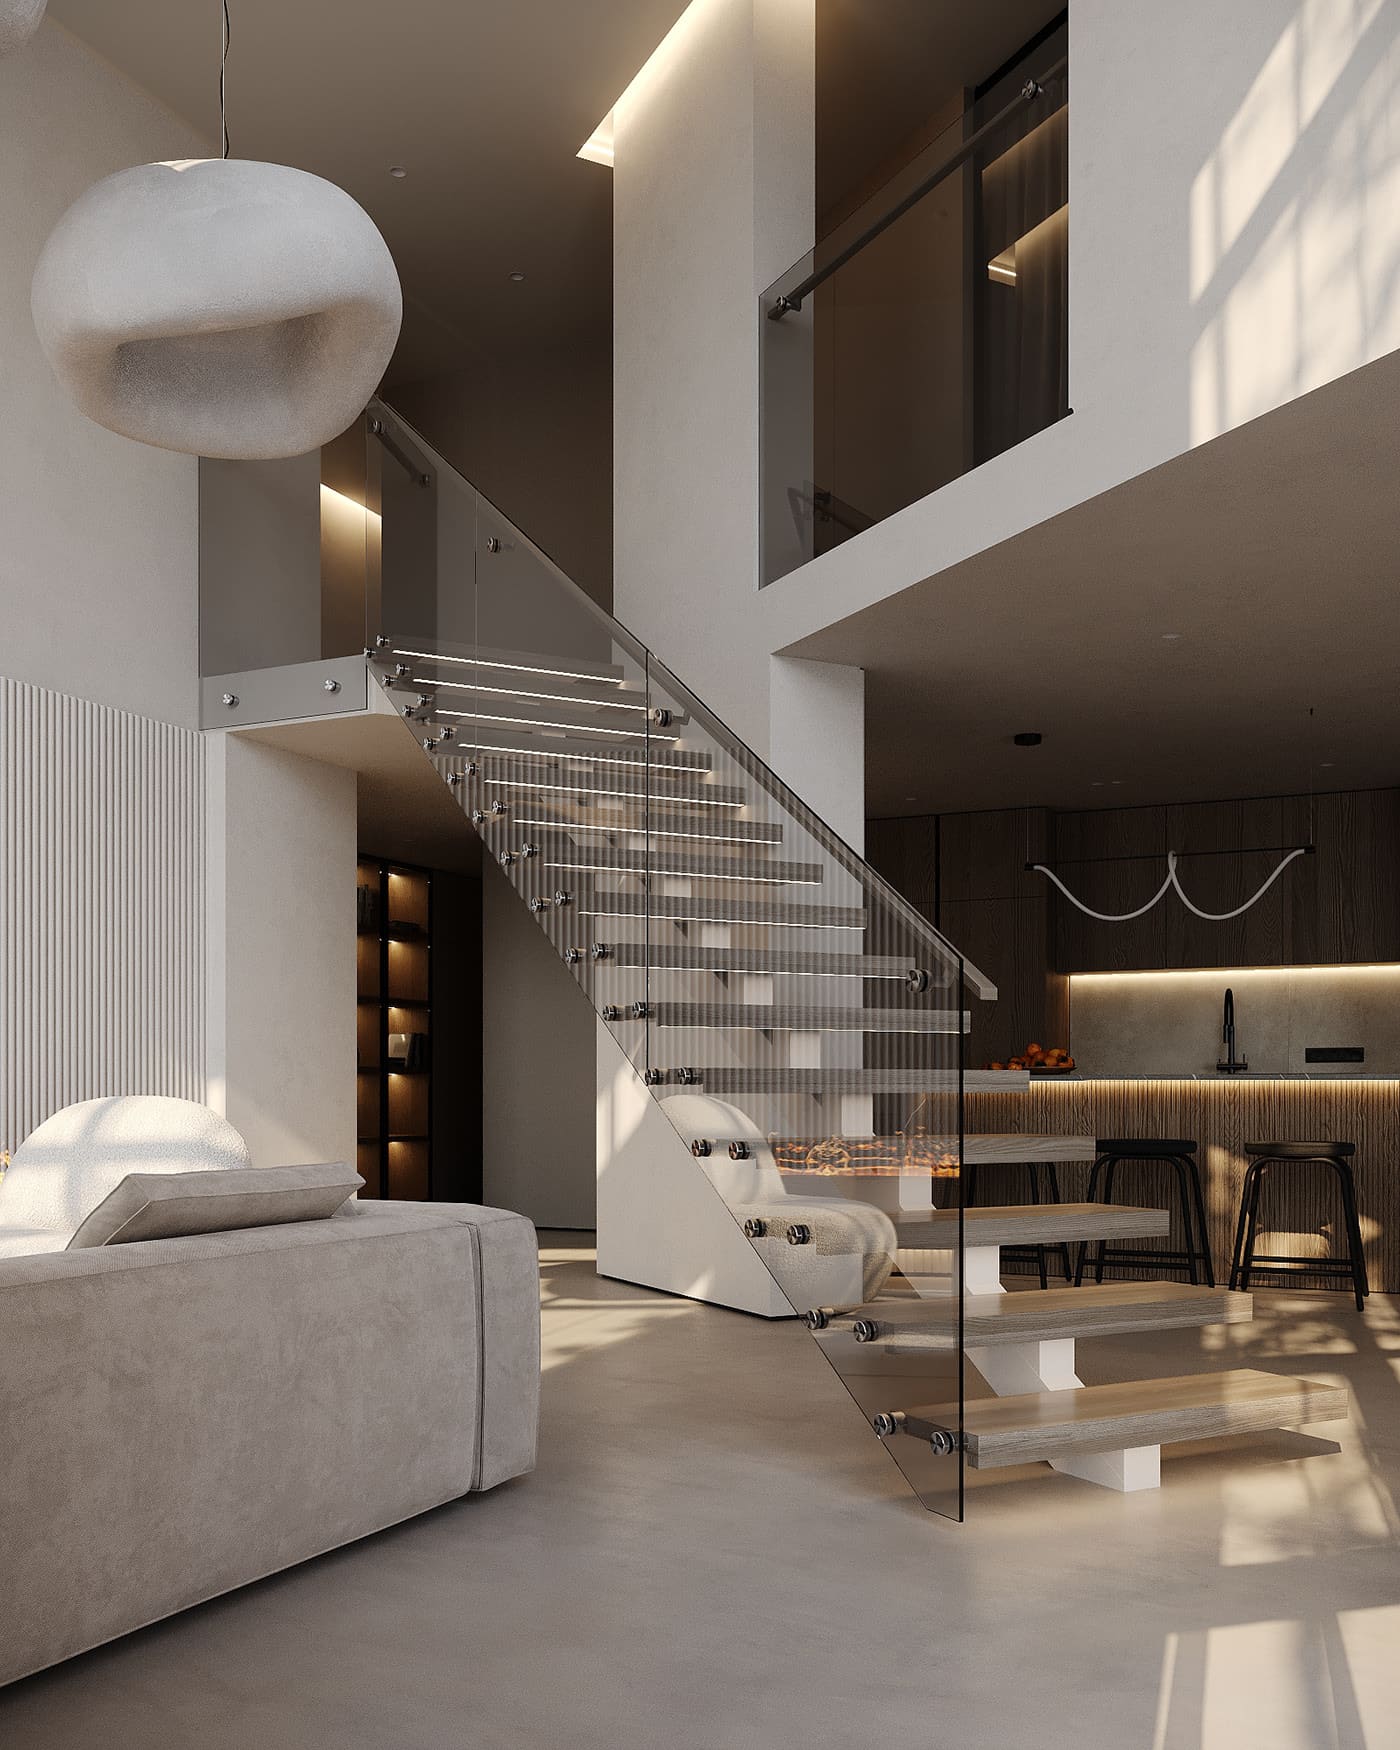 A spacious two-level apartment for a couple with wabi-saba elements, stairs, photo 78